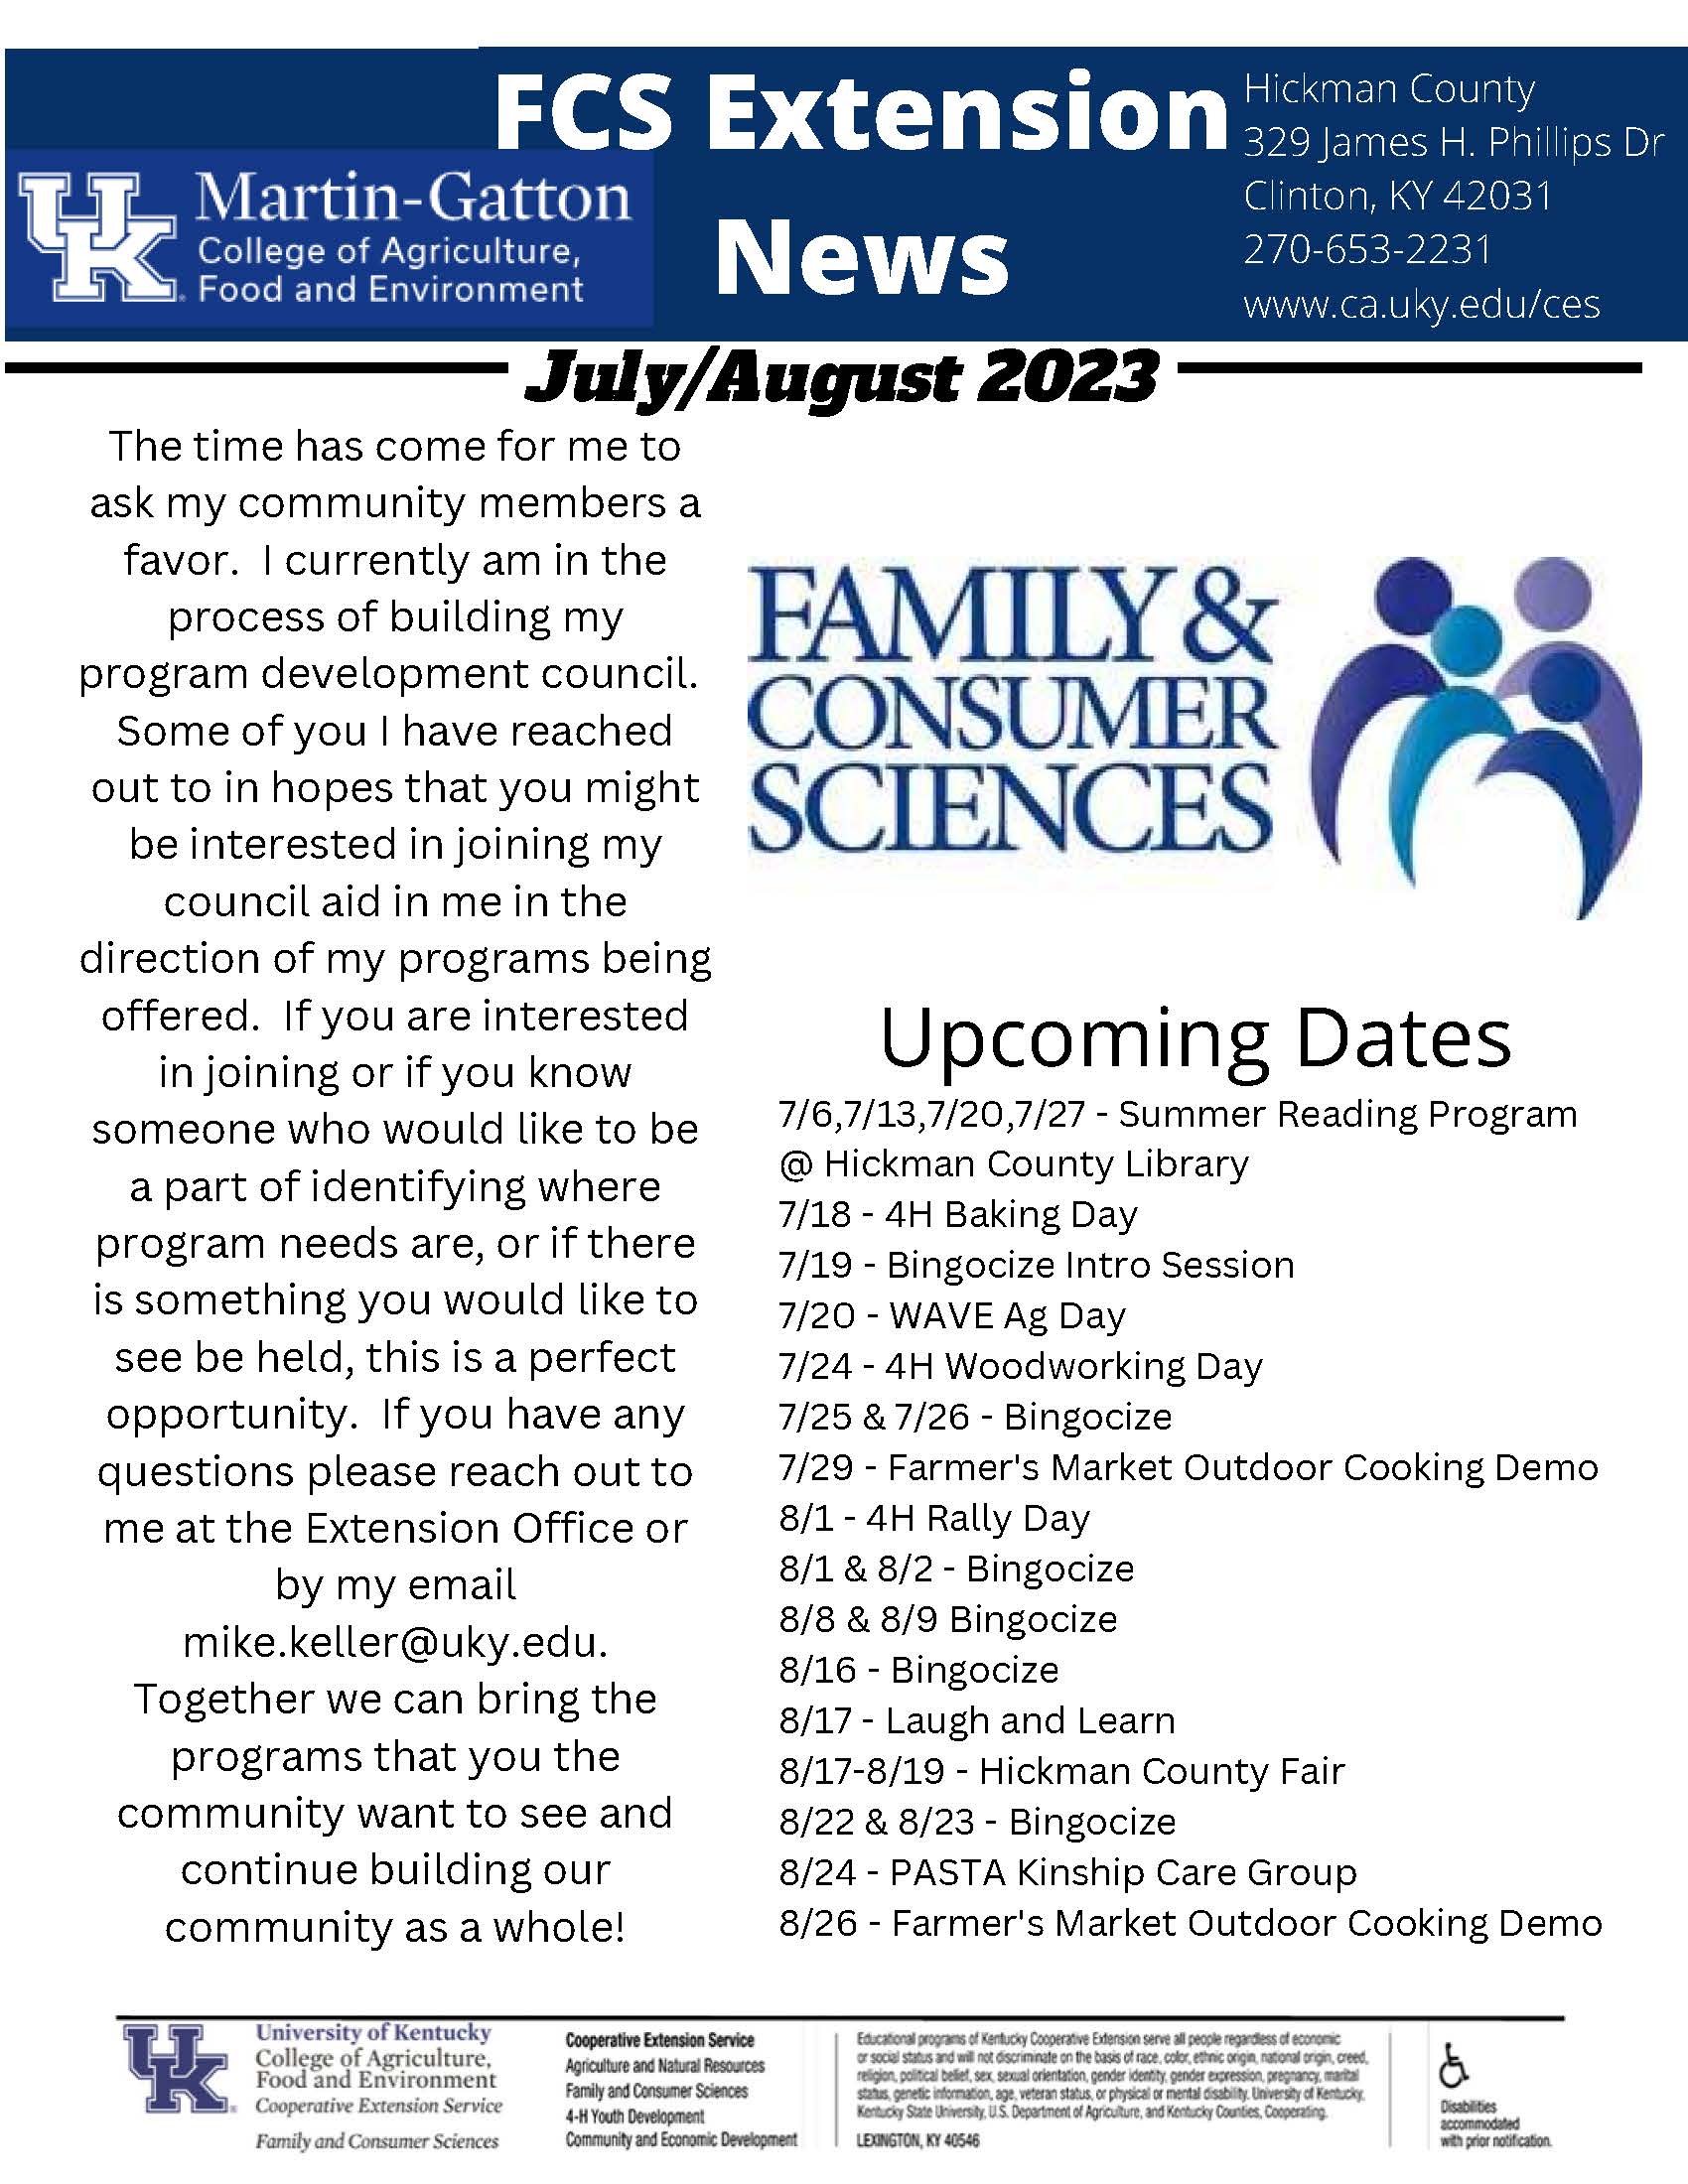 July/August FCS Newsletter 2023